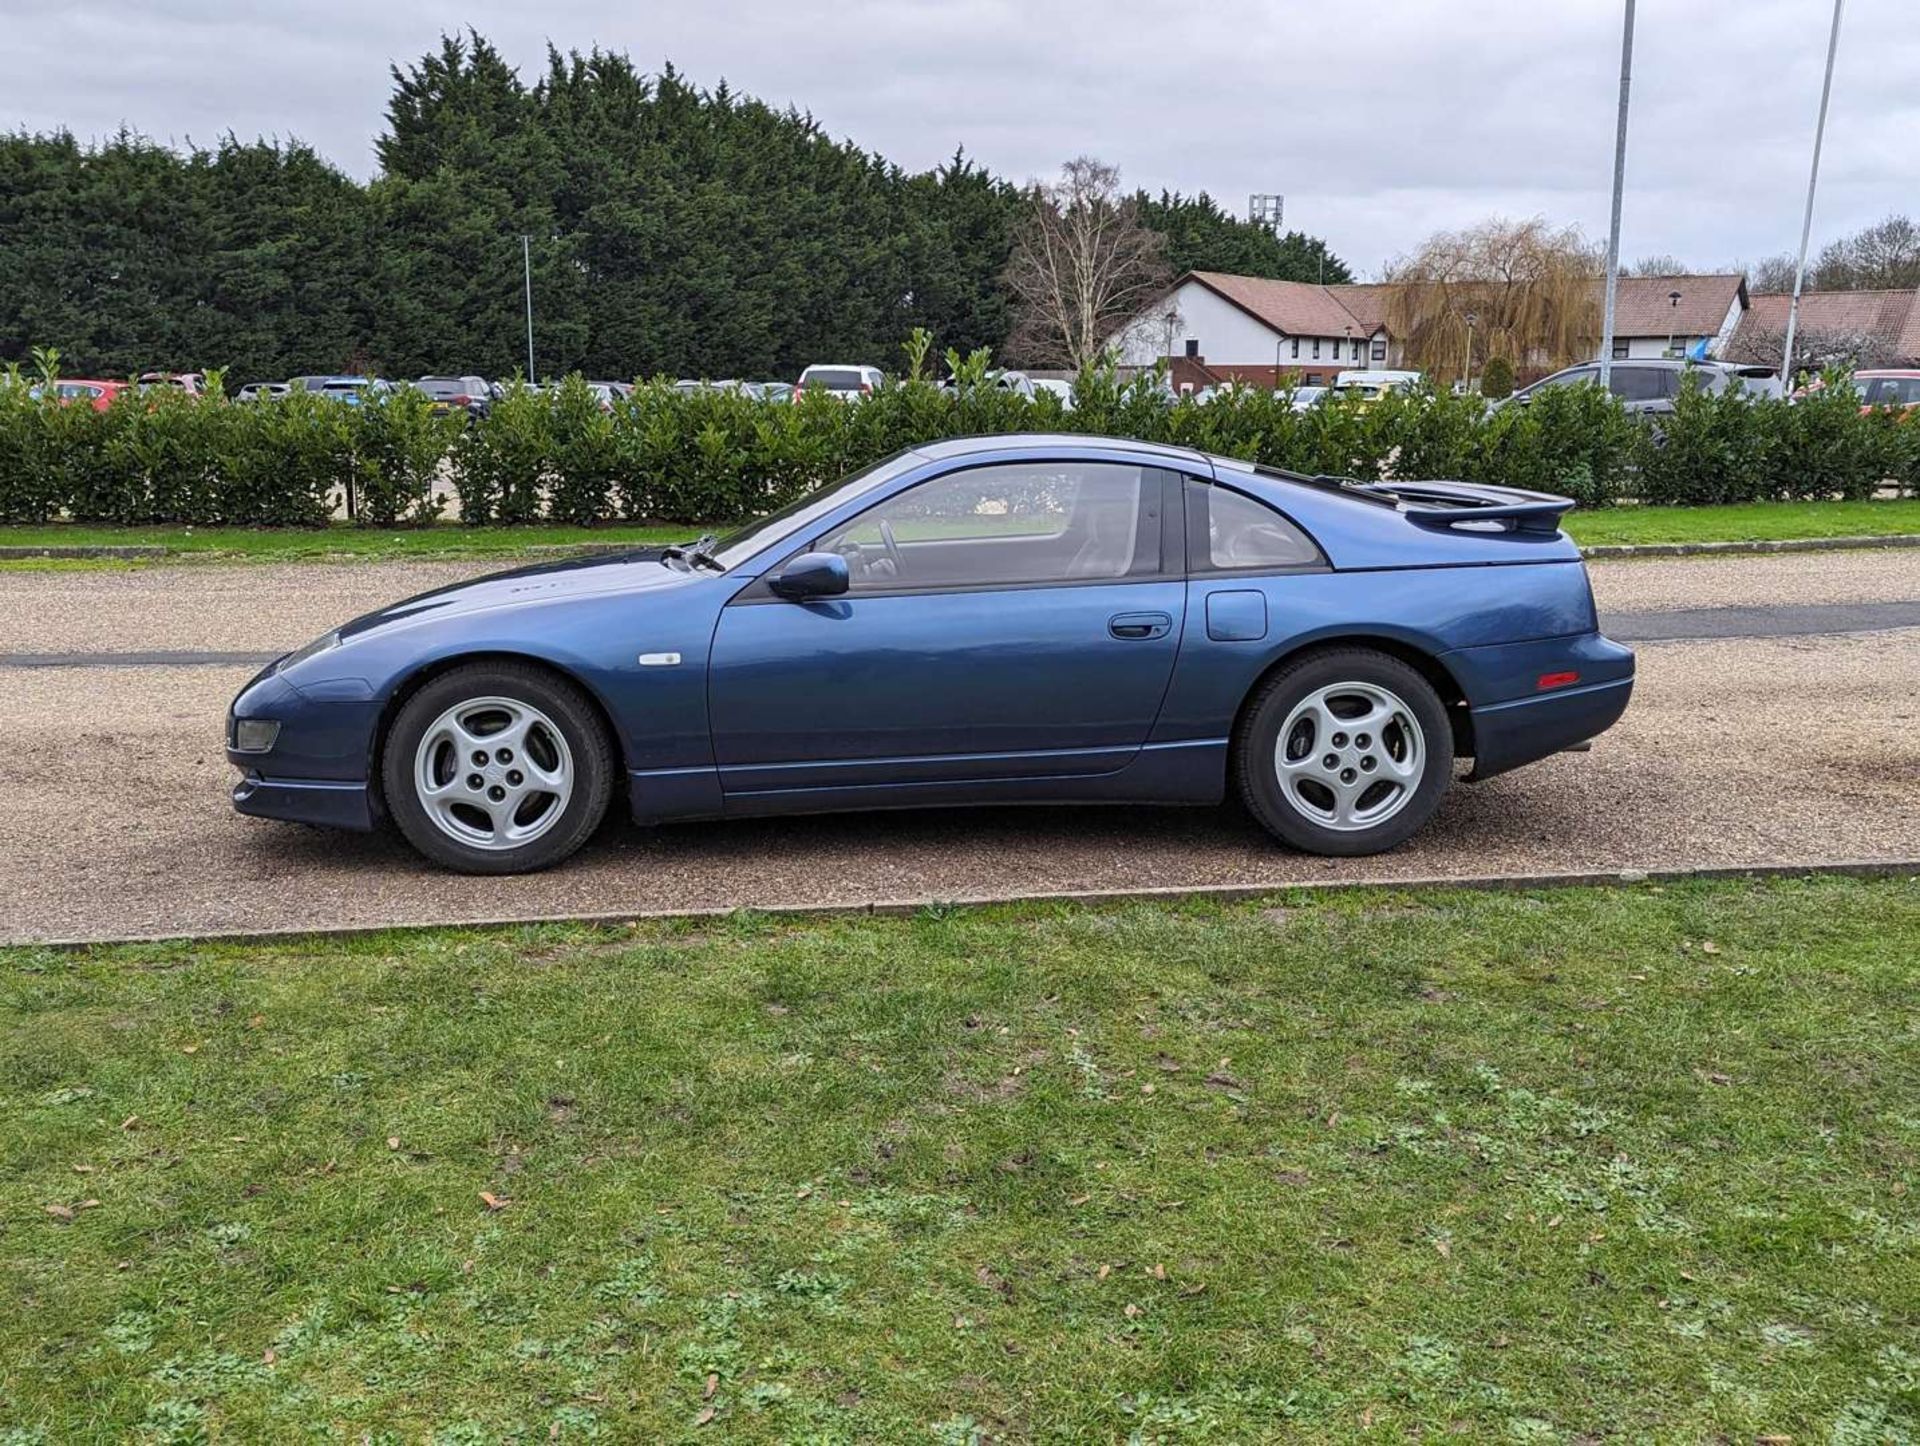 1992 NISSAN FAIRLADY 300ZX - Image 4 of 29